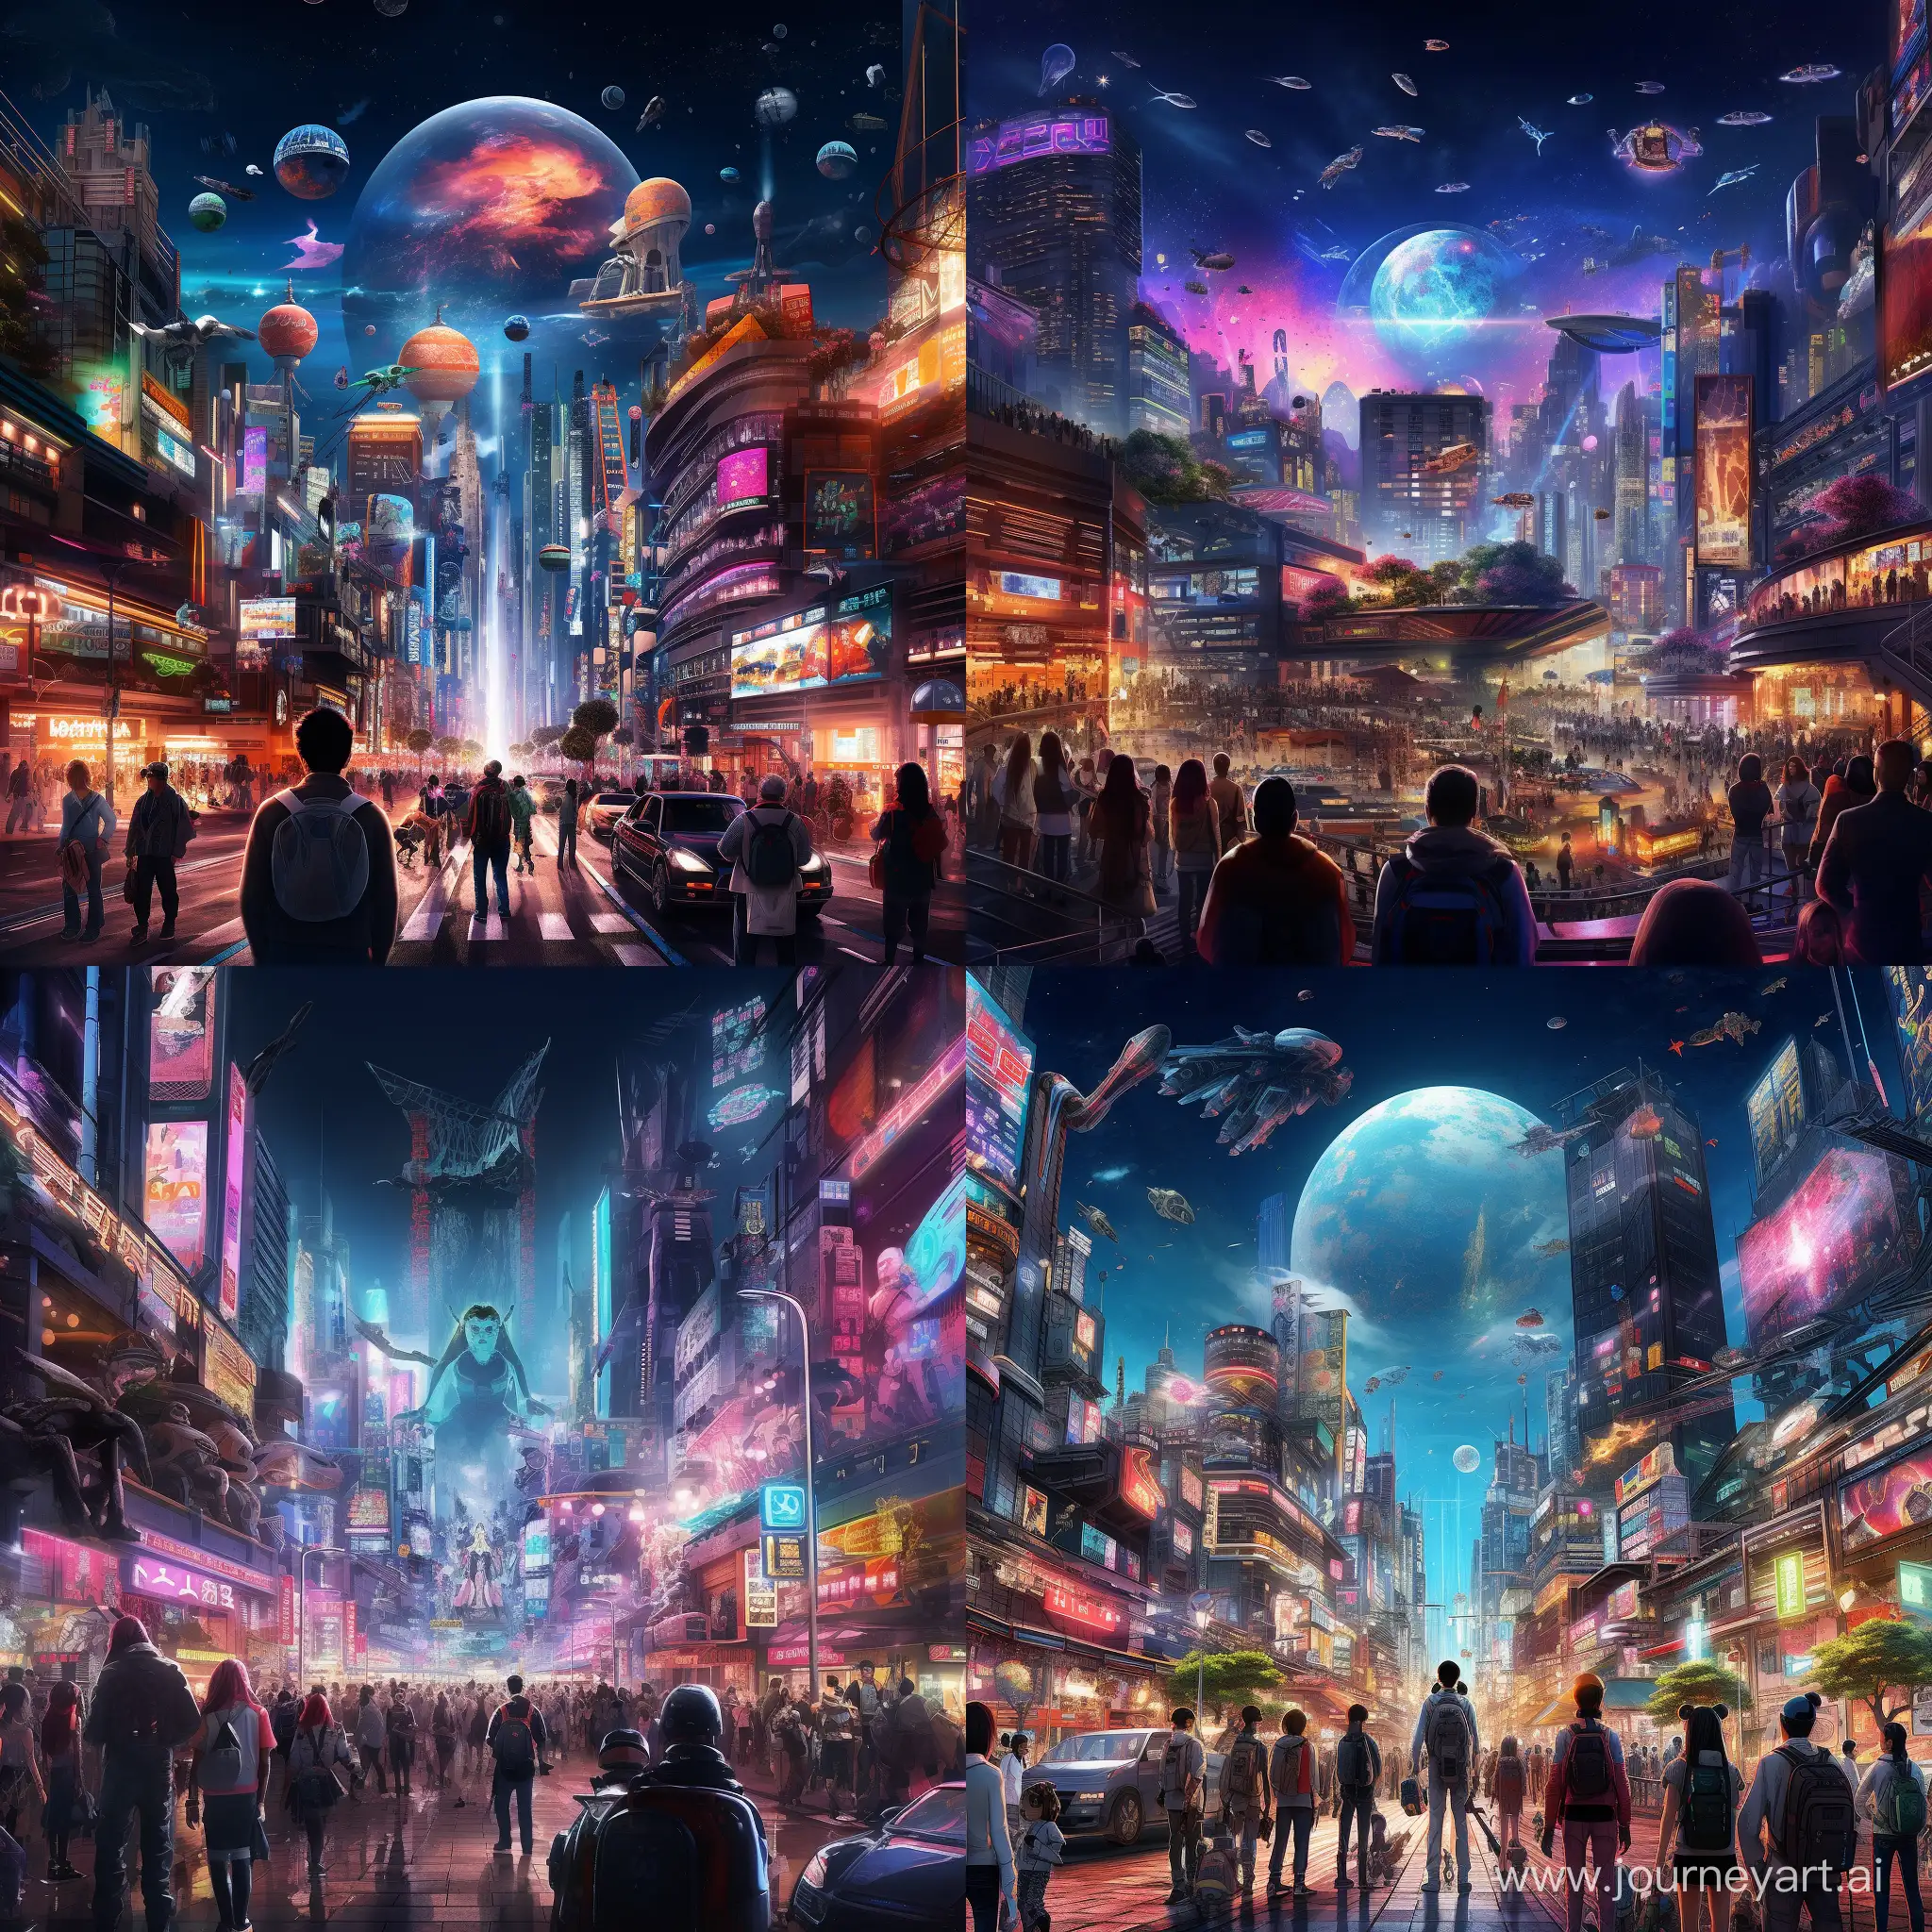 a futuristic cyberpunk cityscape at night with towering neon-lit skyscrapers, flying cars, and a diverse crowd of humans and androids